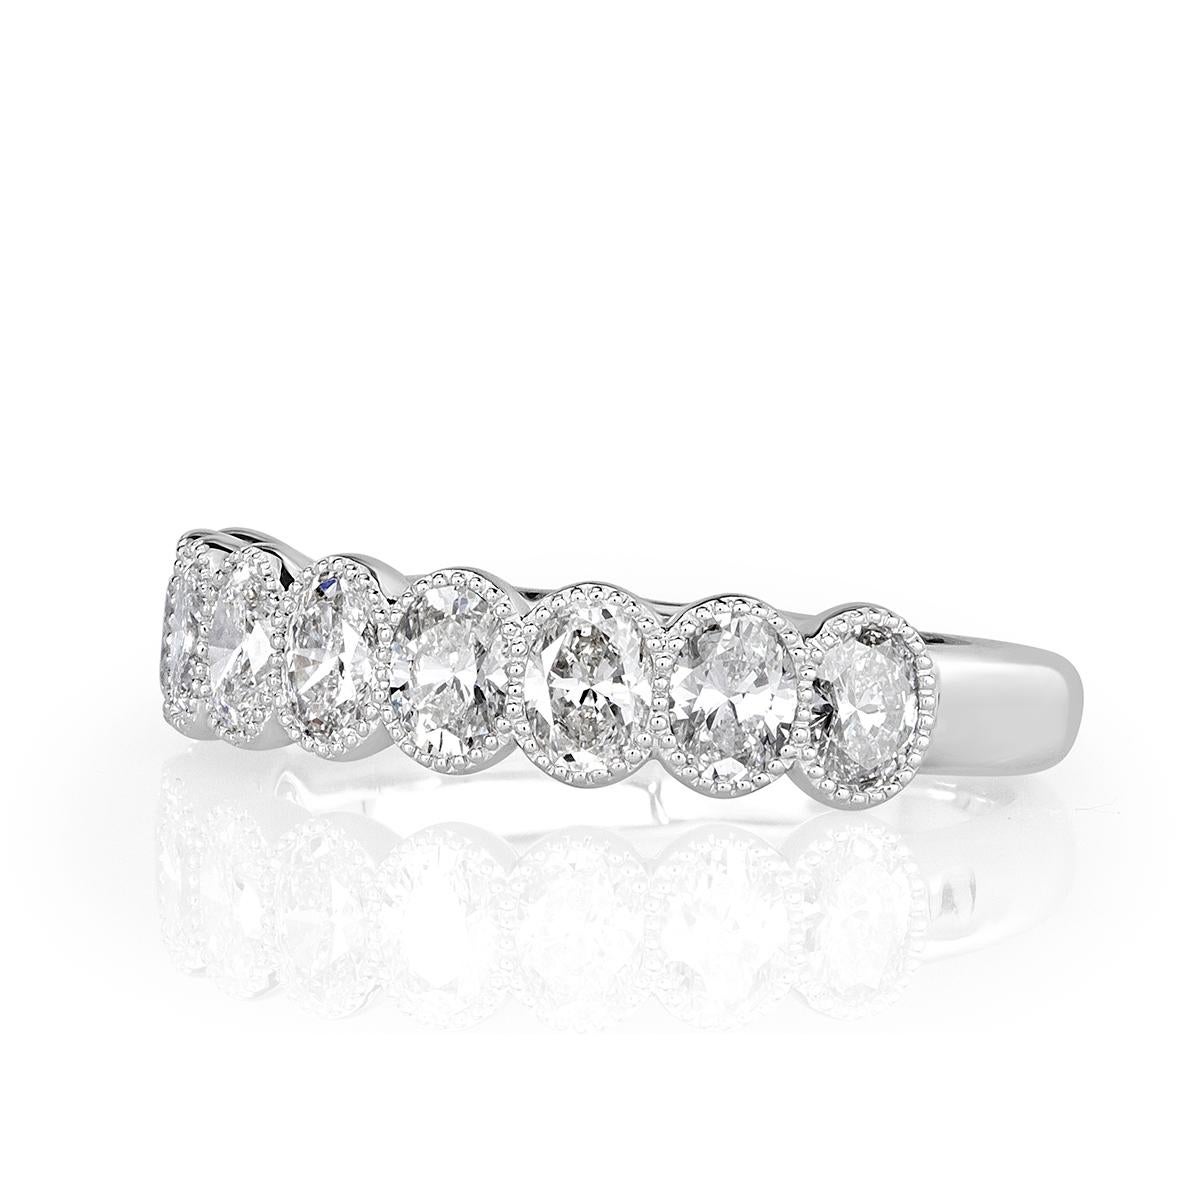 Custom created in 18k white gold, this delightful diamond band showcases 1.26ct of oval cut diamonds each accented by delicate hand milgrain detail. The diamonds are graded at E-F in color, VVS2-VS1 in clarity.